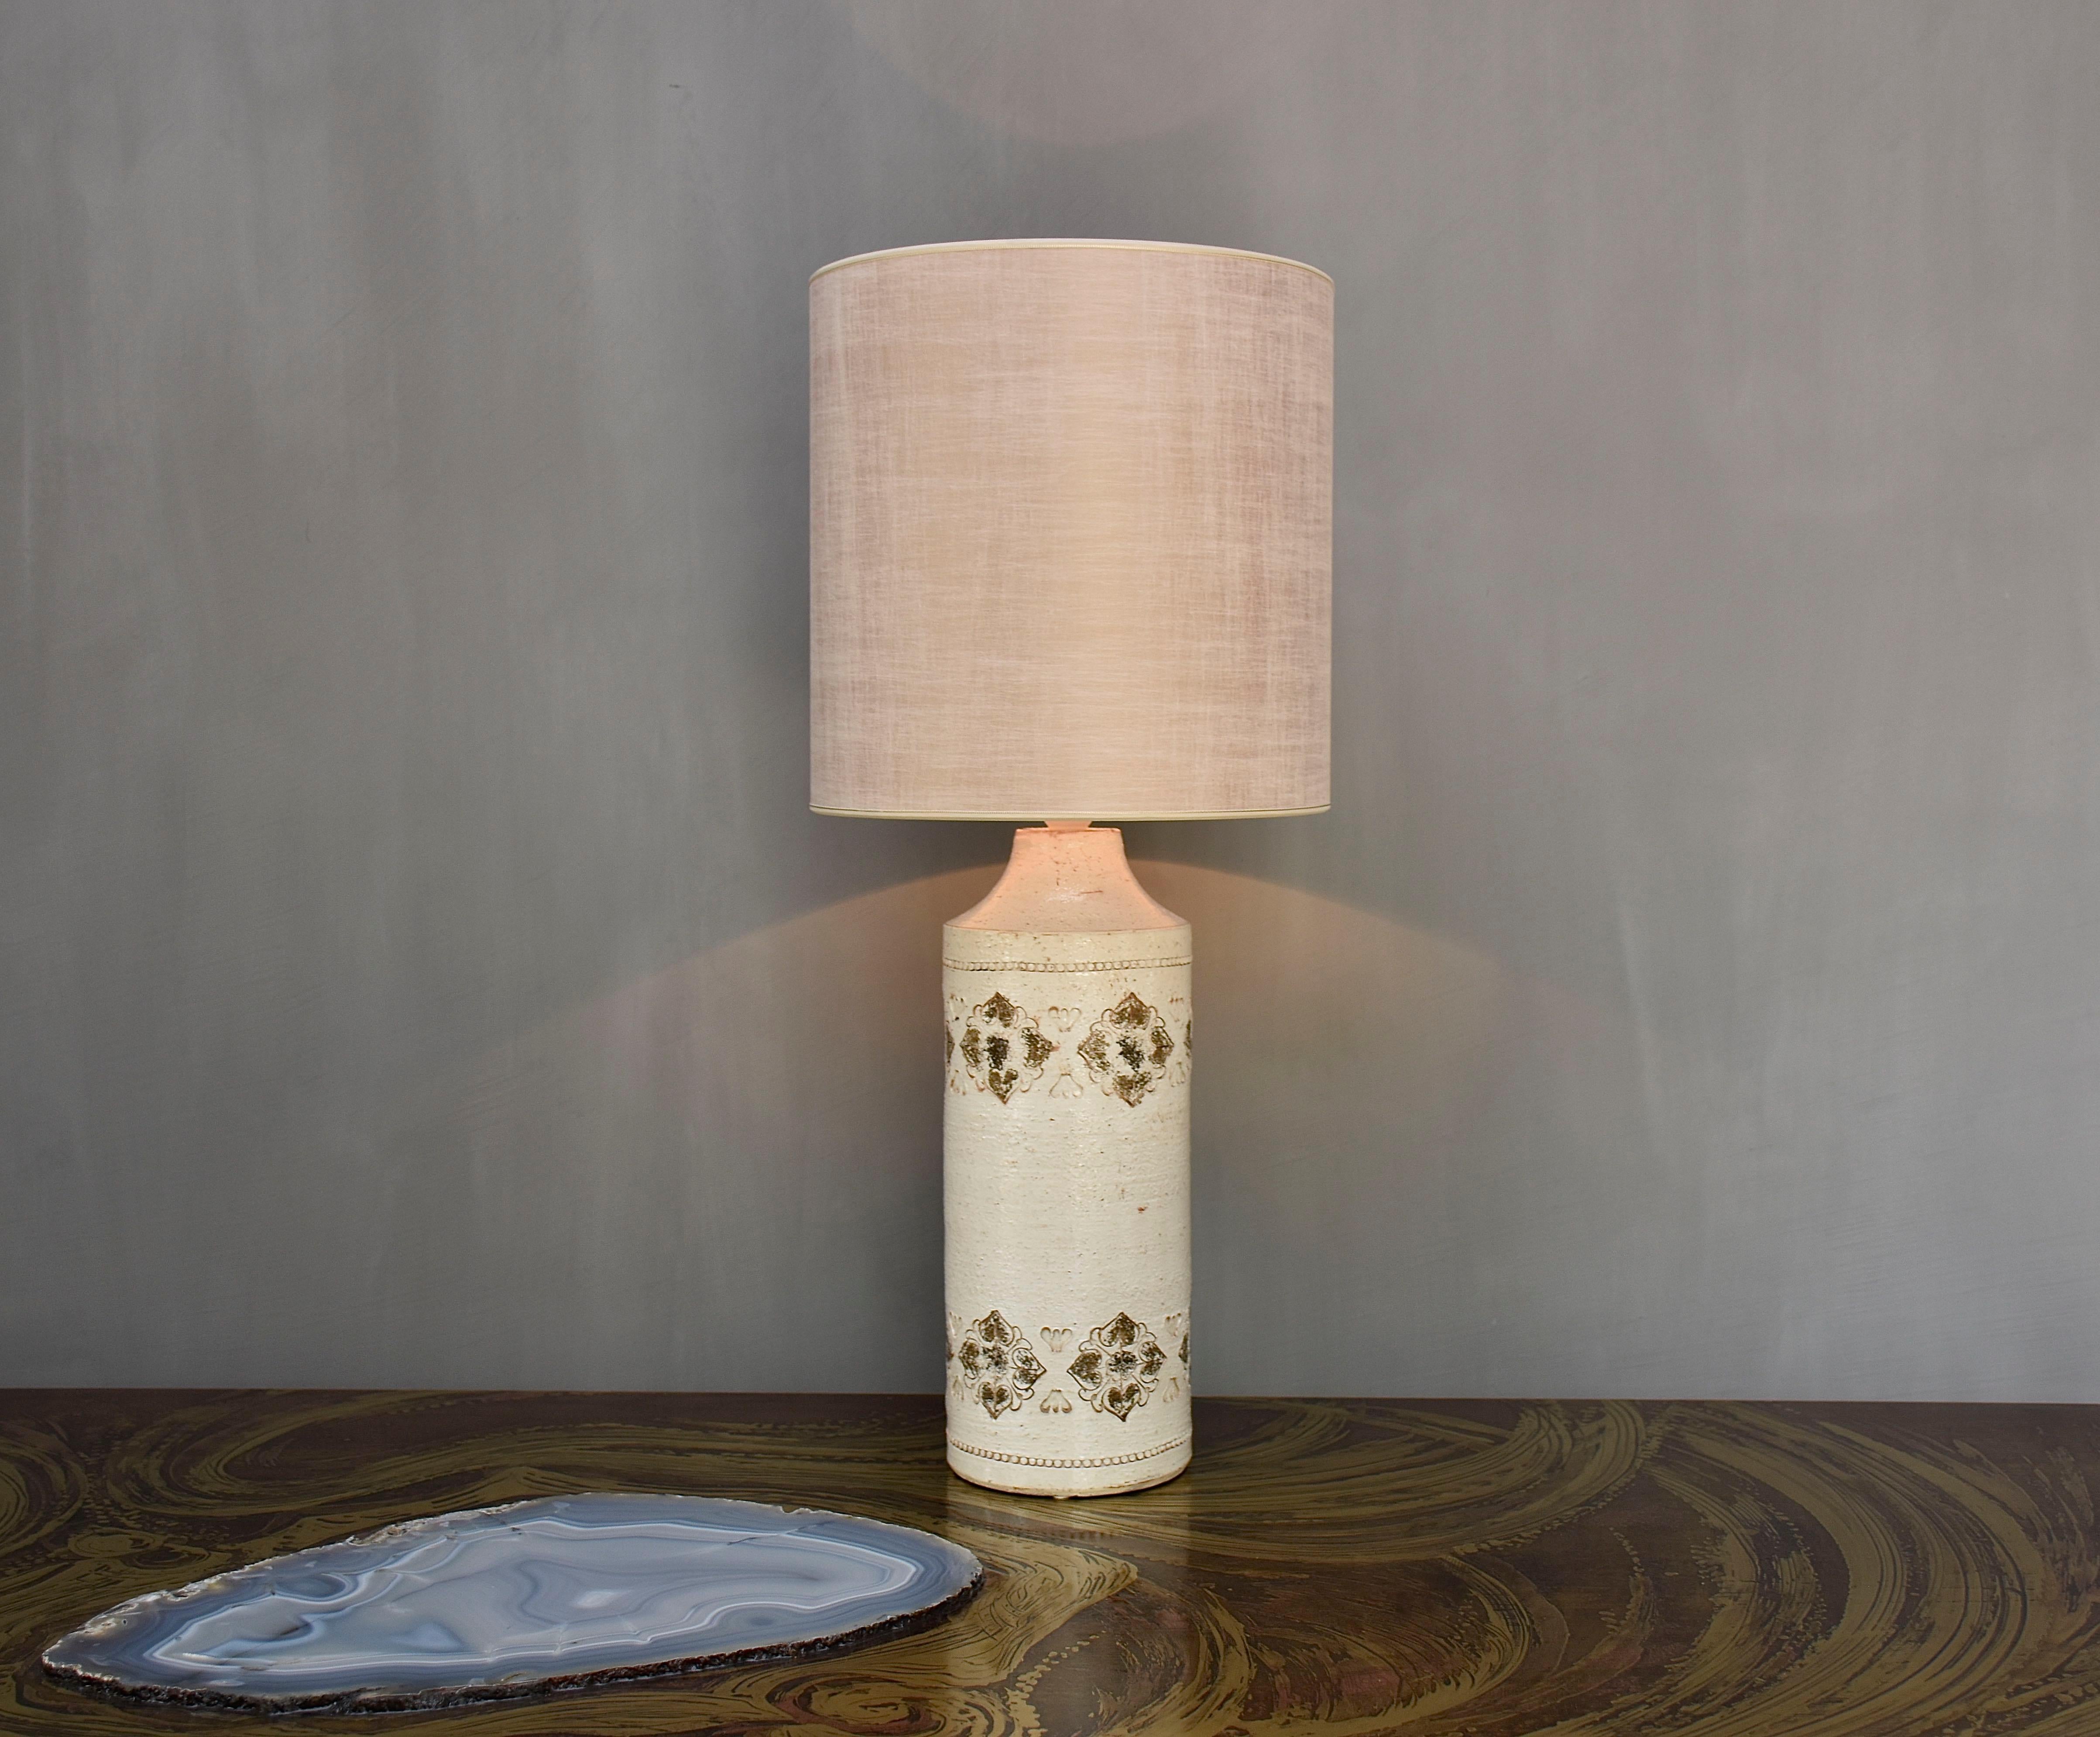 Beautiful ceramic table lamp designed by Bitossi for Bergboms- Sweden.
These pretty lamp has white glazed base with  texture and brown patterns.
Period- ca. 1960
Place of origin- Italy/ Sweden
Signed at the bottom.

Height of the lamp is measured